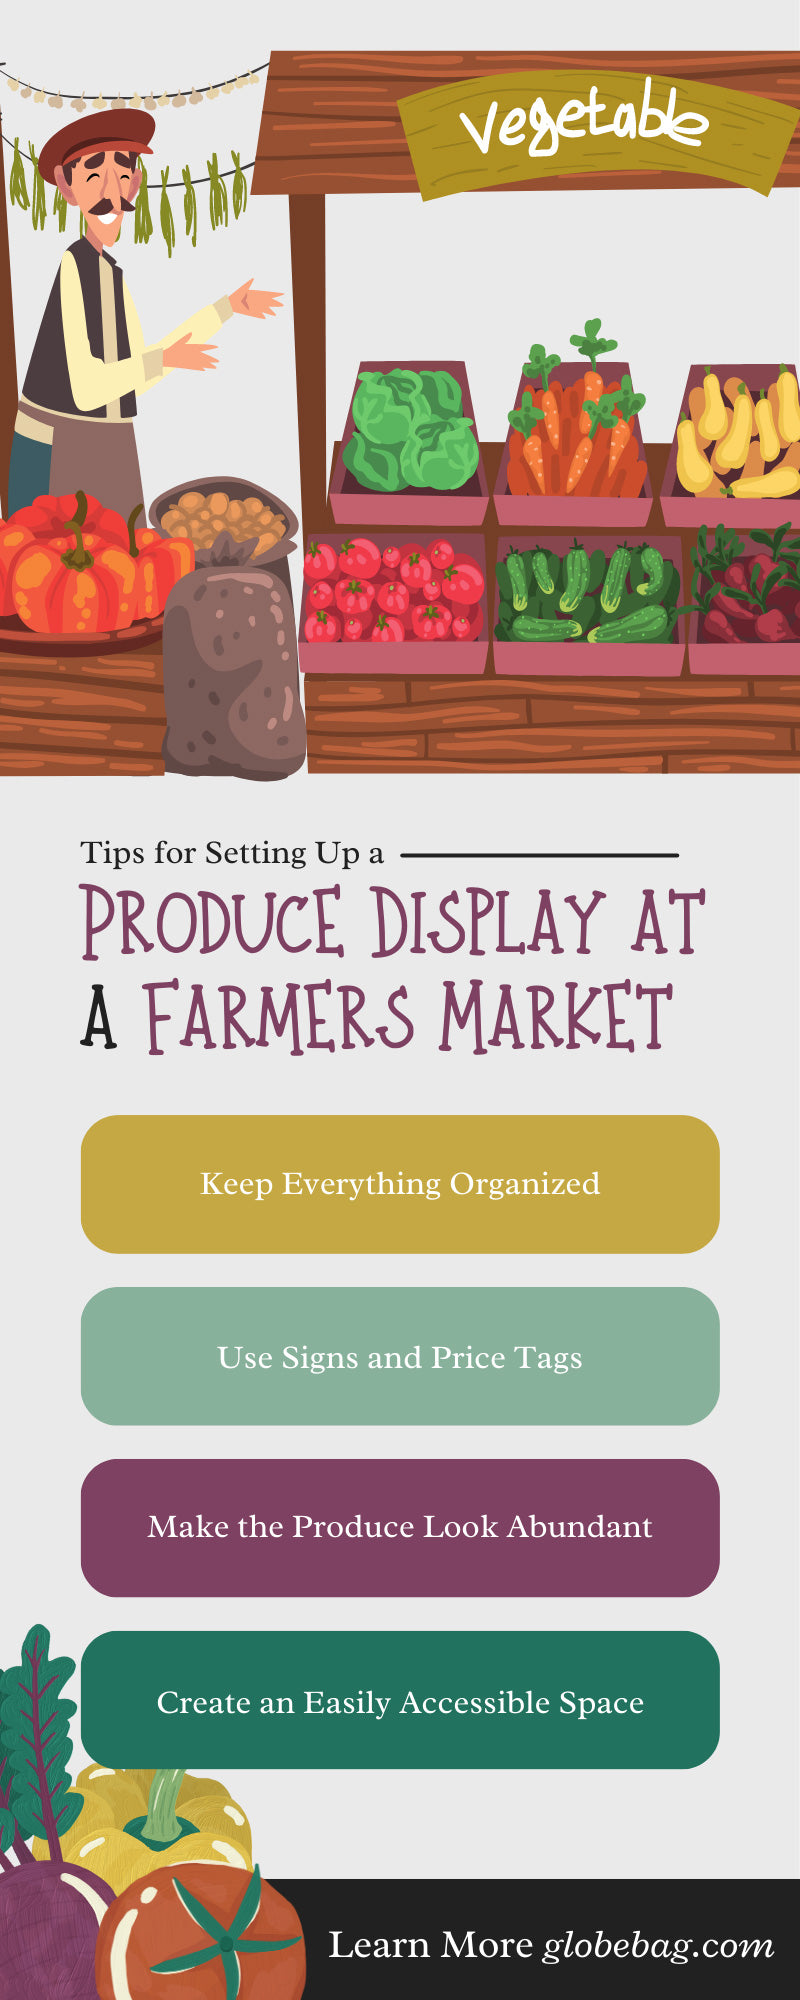 7 Tips for Setting Up a Produce Display at a Farmers Market